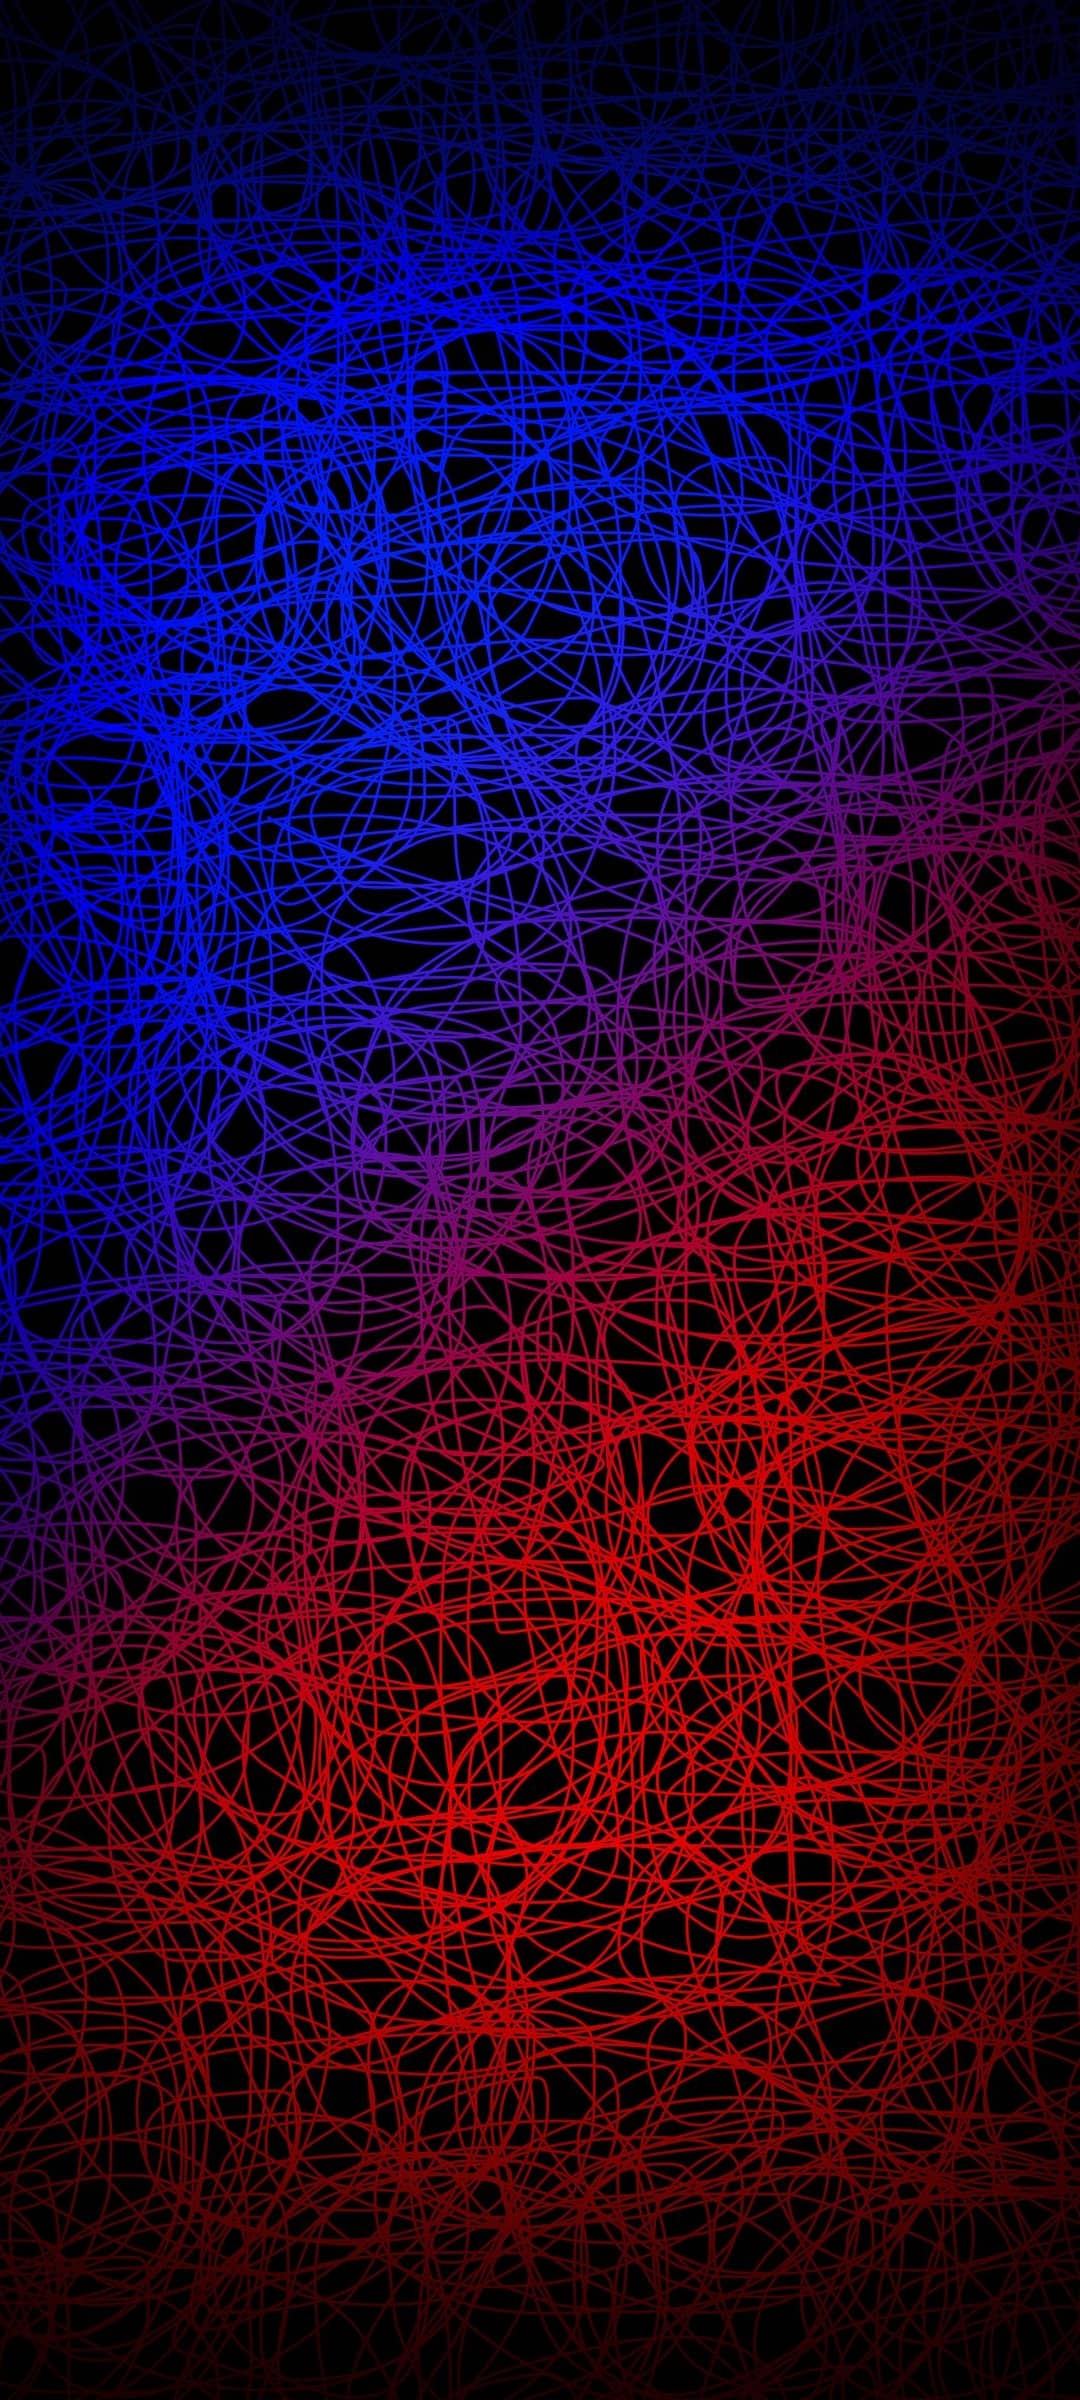 Black and Blue Abstract Phone Wallpaper